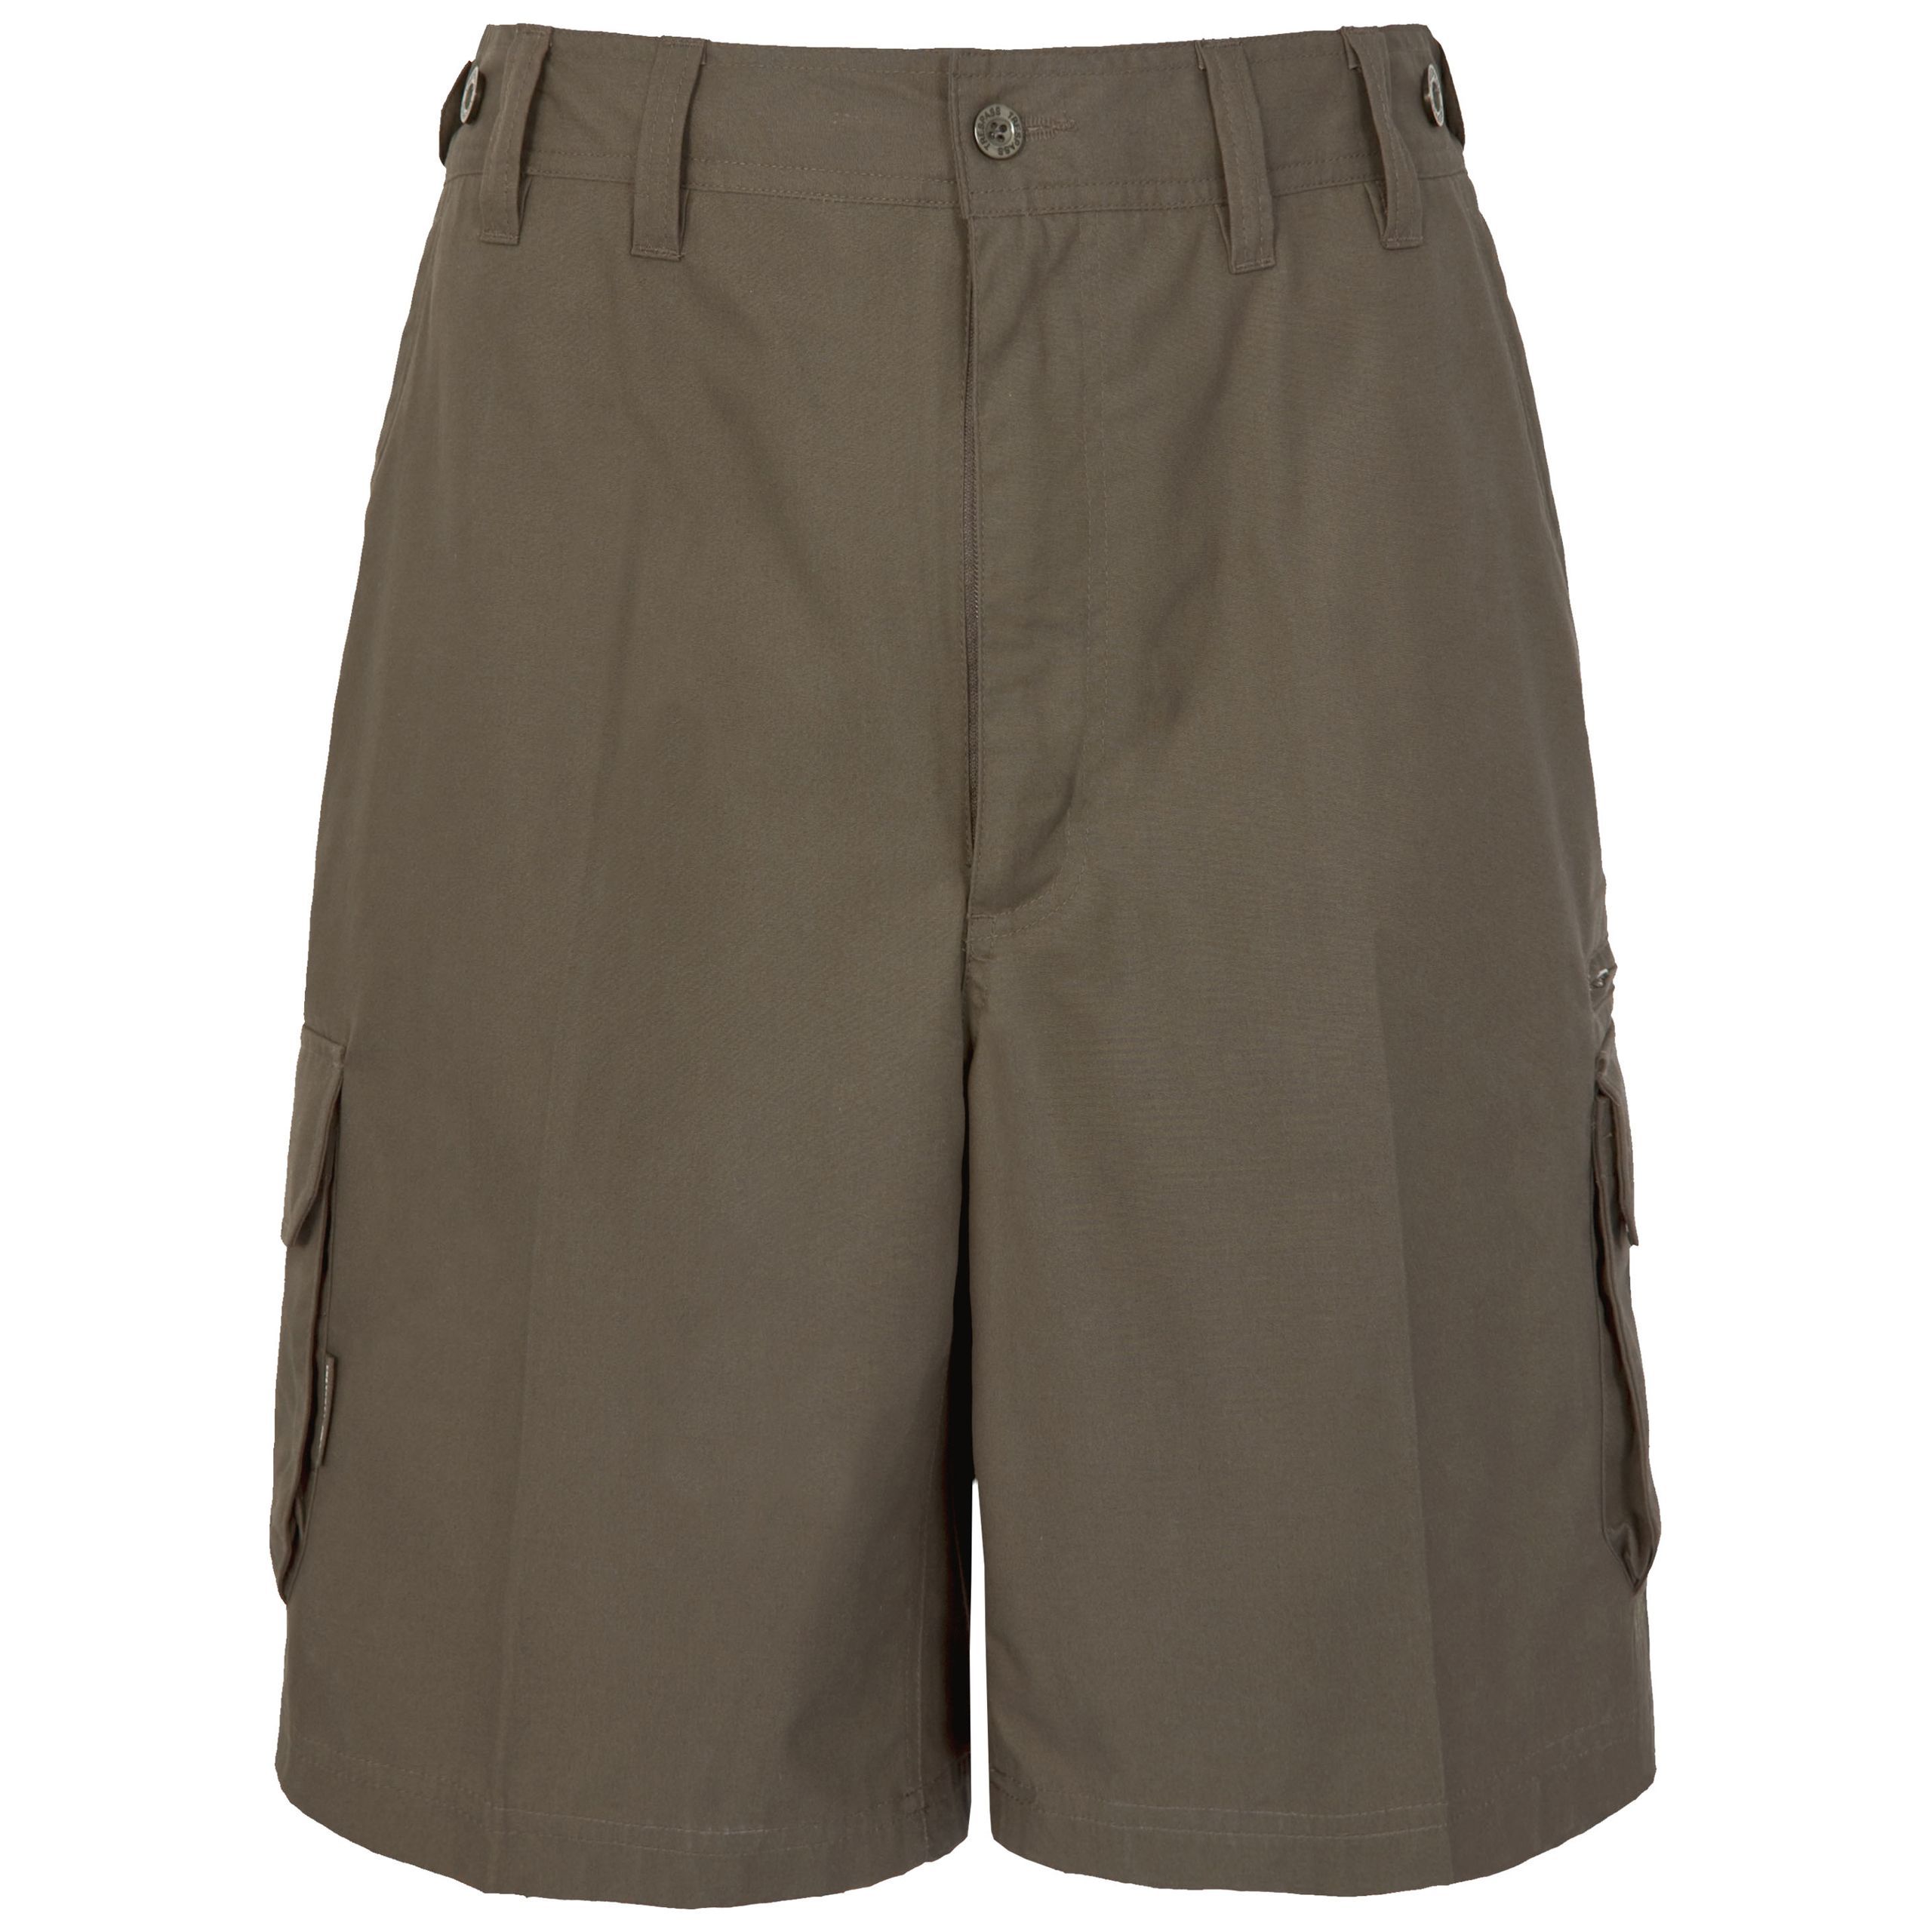 Mens hiking shorts. Water repellent finish. UPF40+ protective fabric. Moisture wicking and quick drying. 2 zipped pockets, 1 concealed zipped pocket, 2 side pockets and 4 bellow patch pockets. Elasticated back panel with side adjusters. 65% Polyester, 35% Cotton.